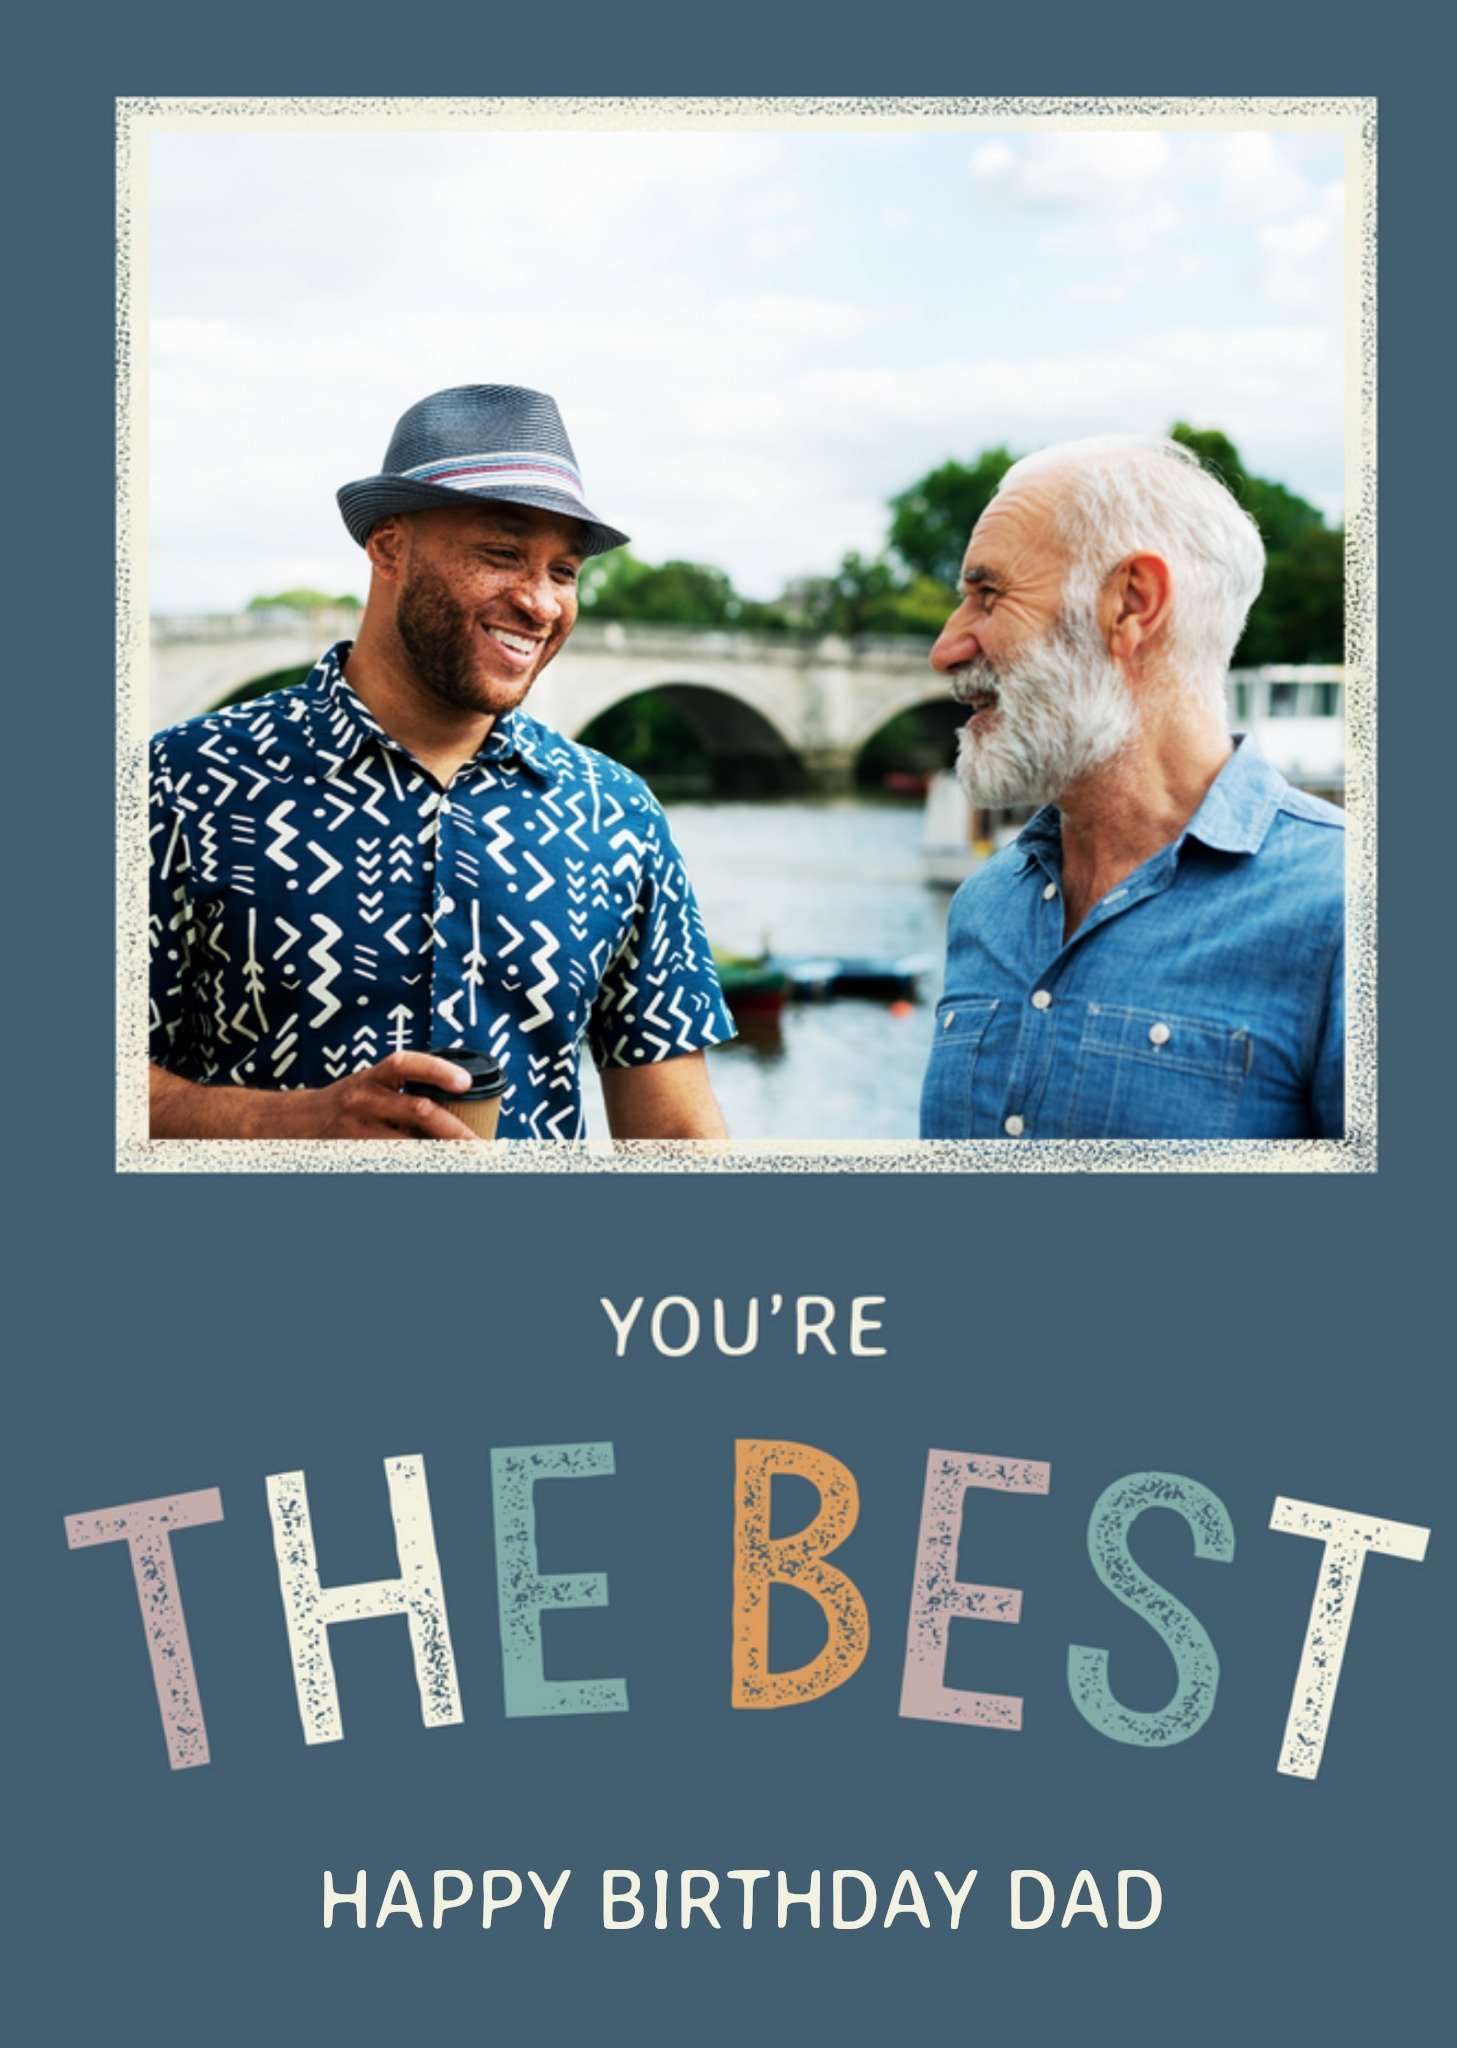 Moonpig You're The Best Print Textured Typography Photo Upload Birthday Card, Large